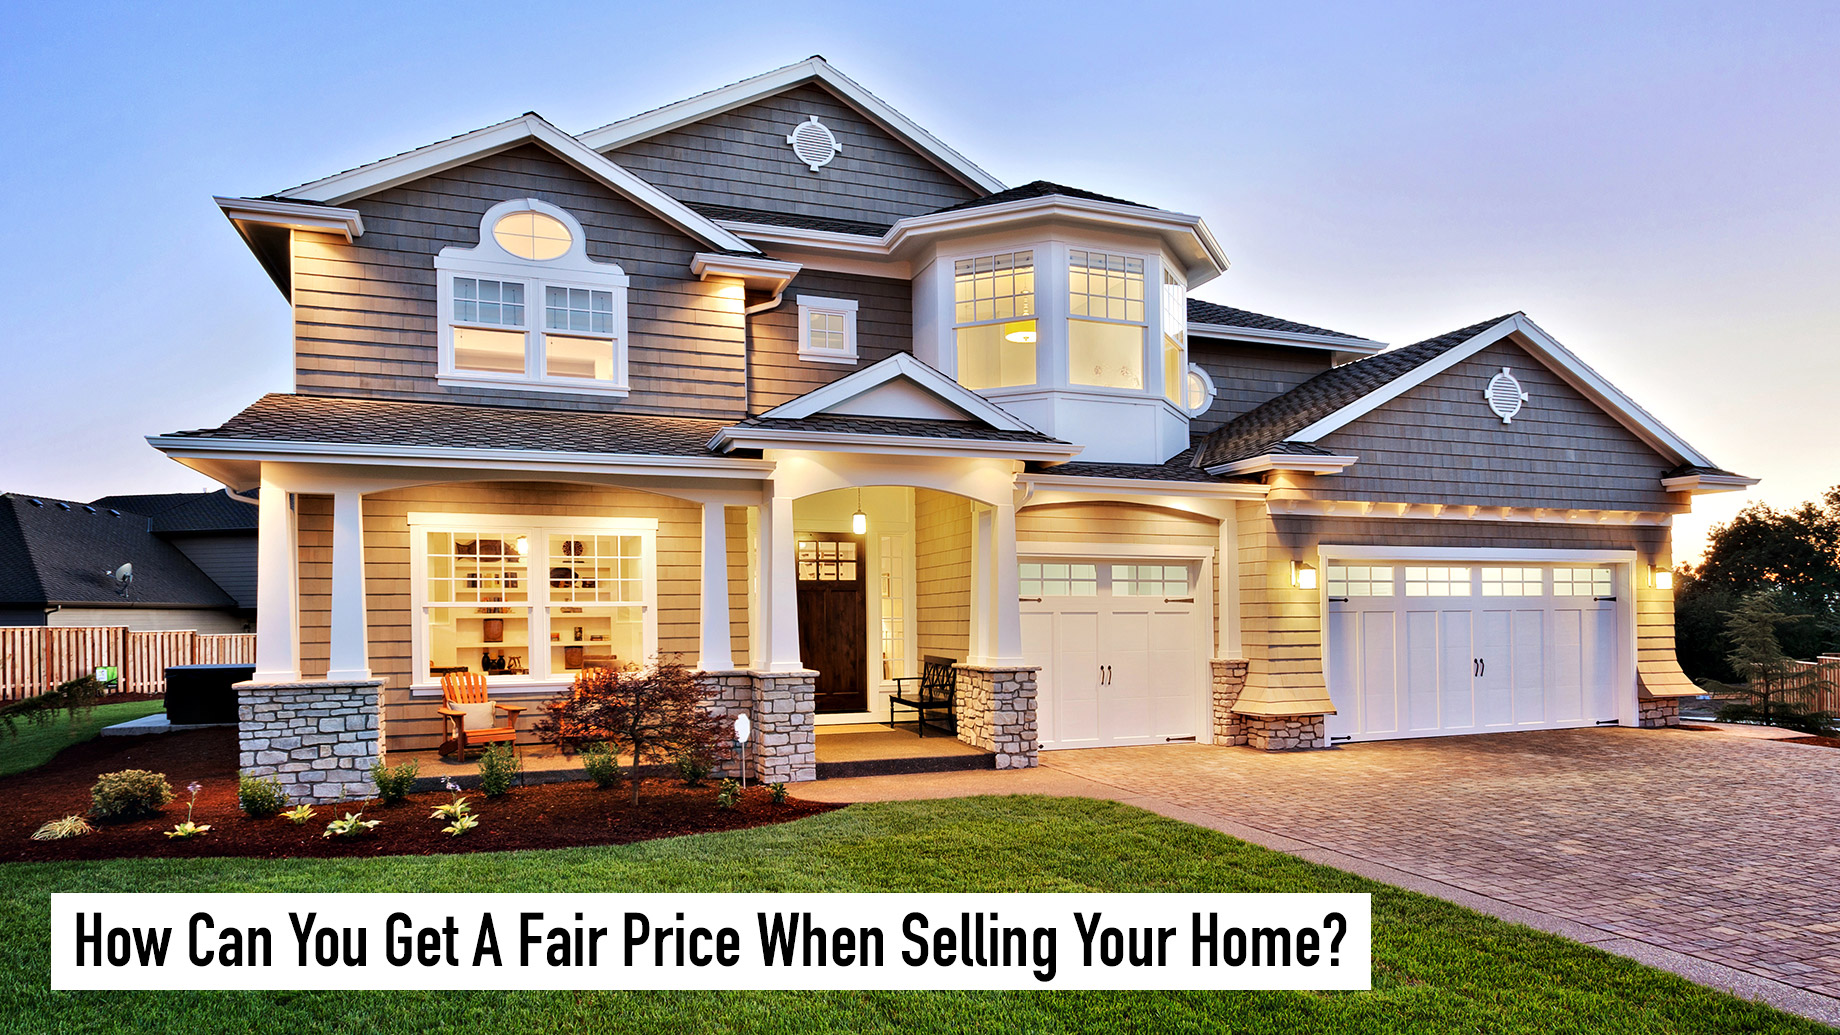 How Can You Get A Fair Price When Selling Your Home?